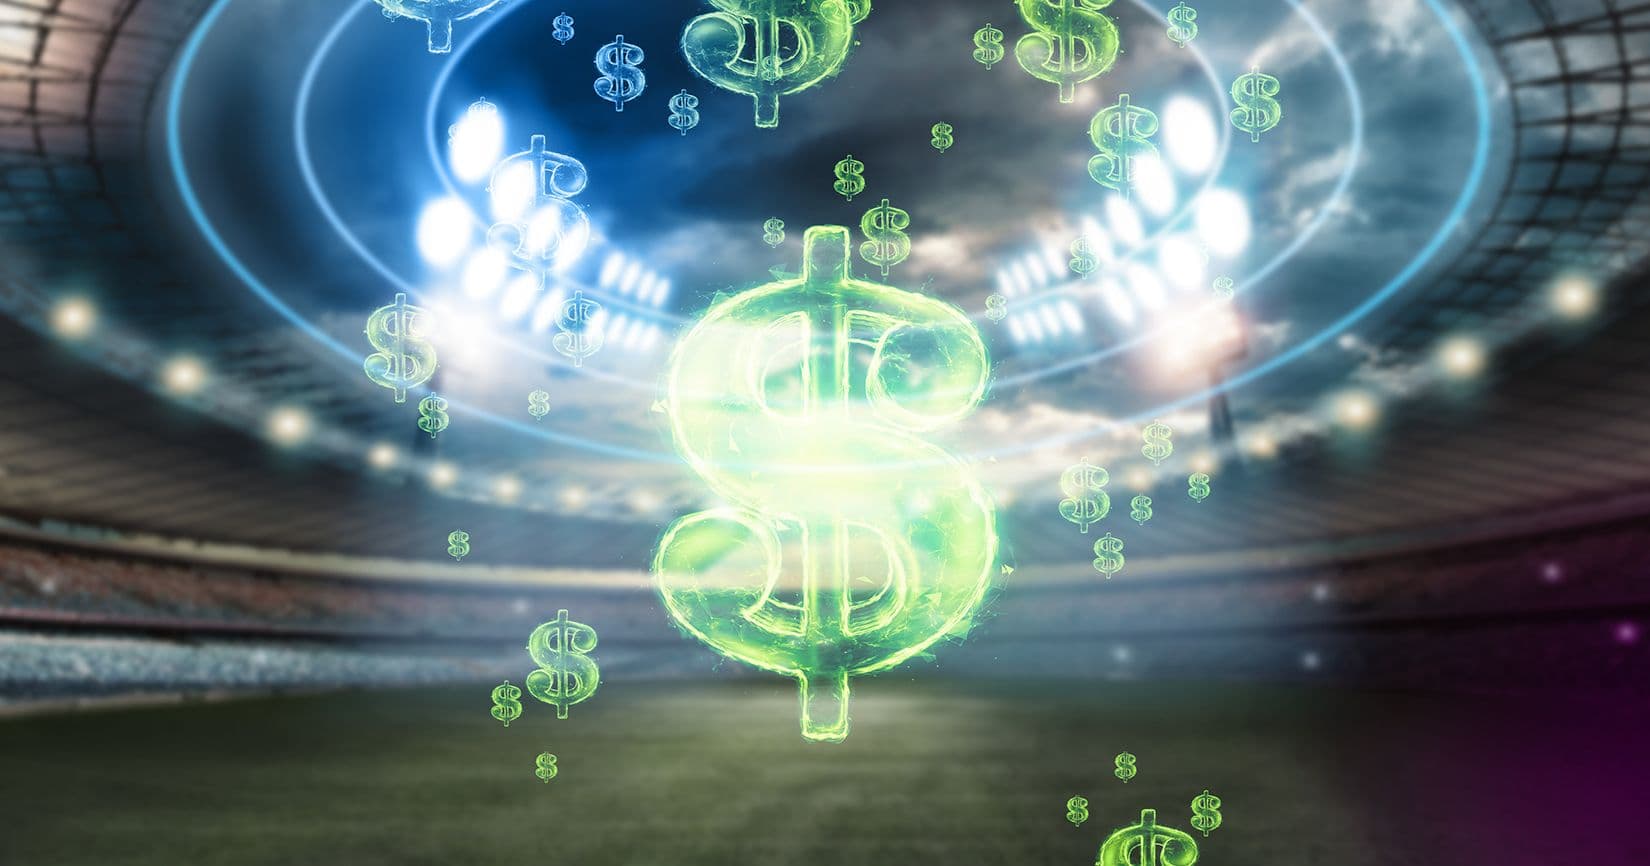 "PSCU Payments Index March 2024: A Deep Dive on Gambling Following Record-Breaking Betting on Super Bowl LVIII post thumbnail"